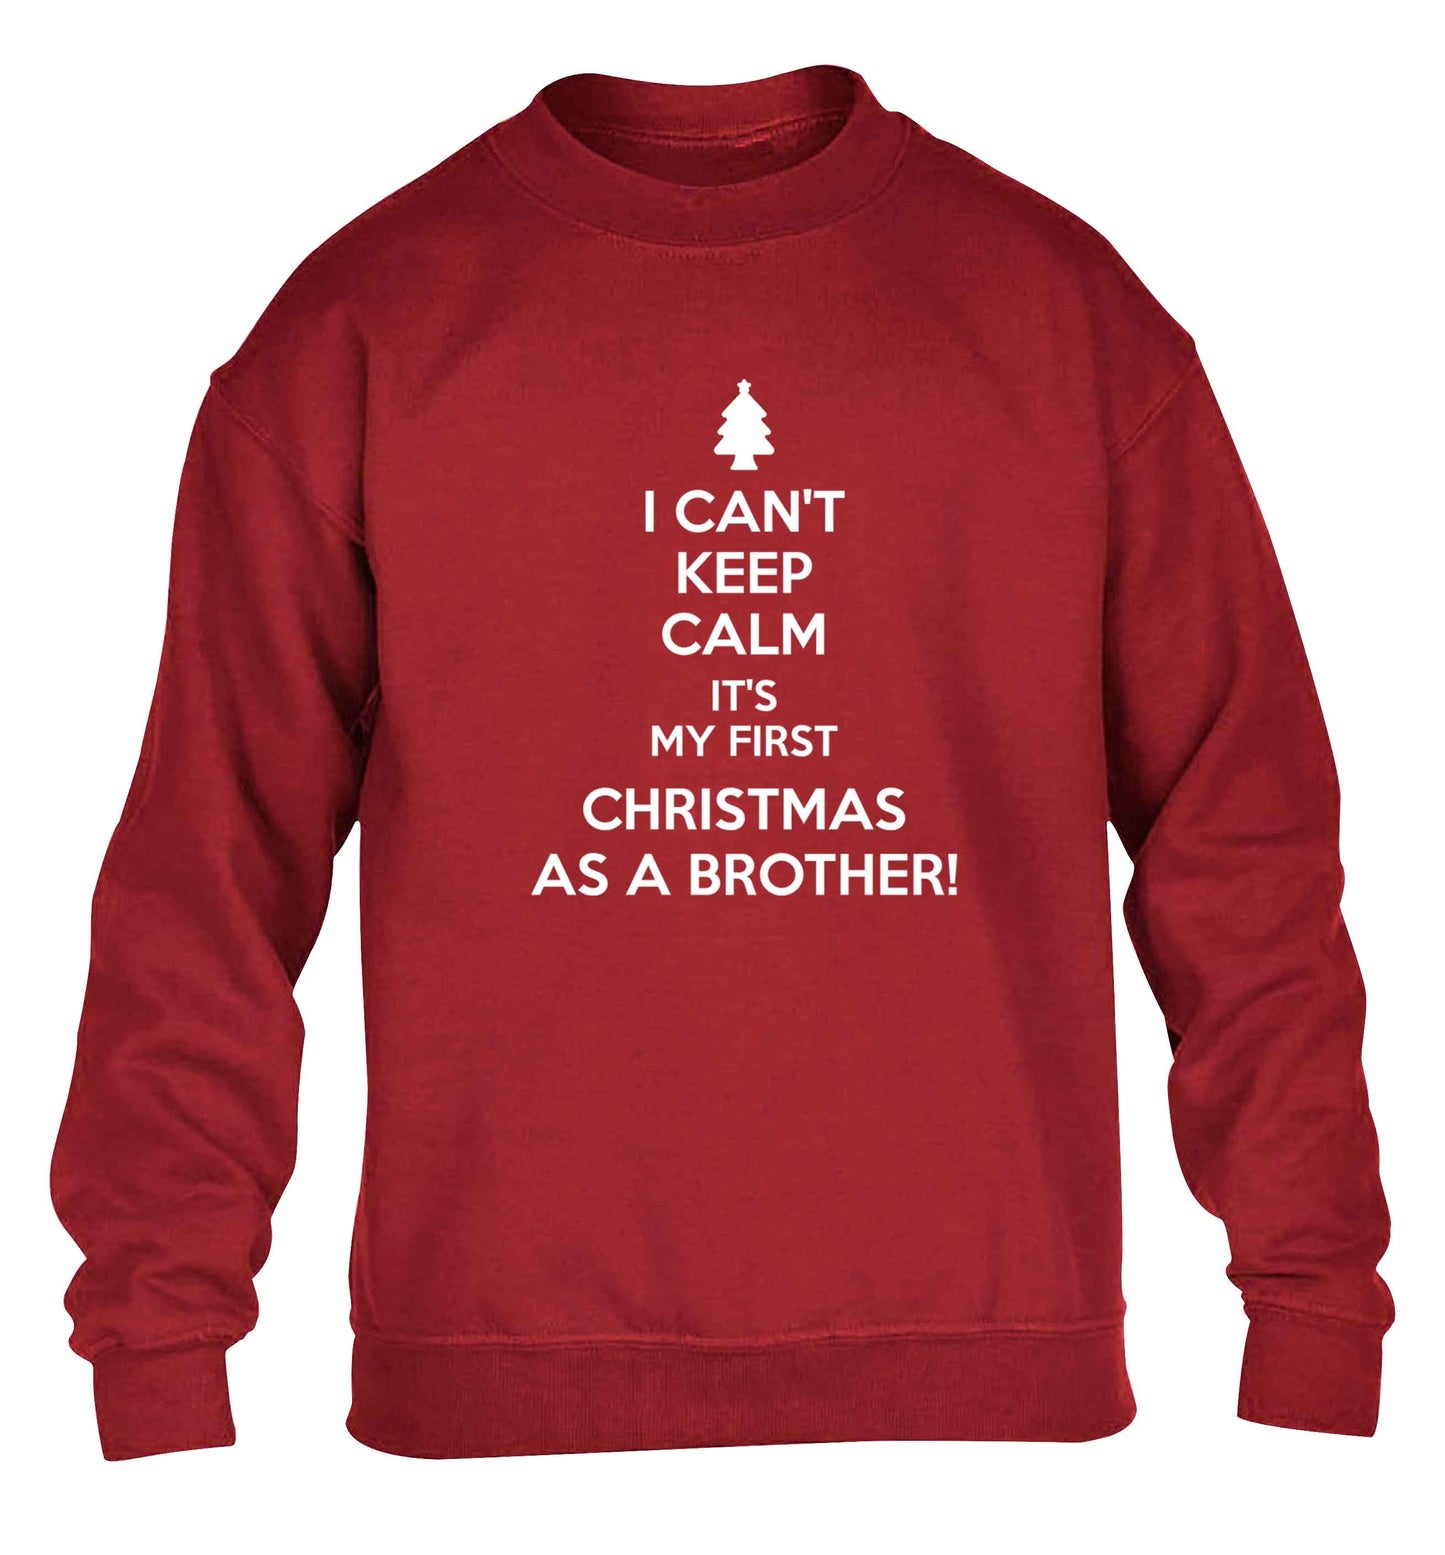 I can't keep calm it's my first Christmas as a brother! children's grey sweater 12-13 Years